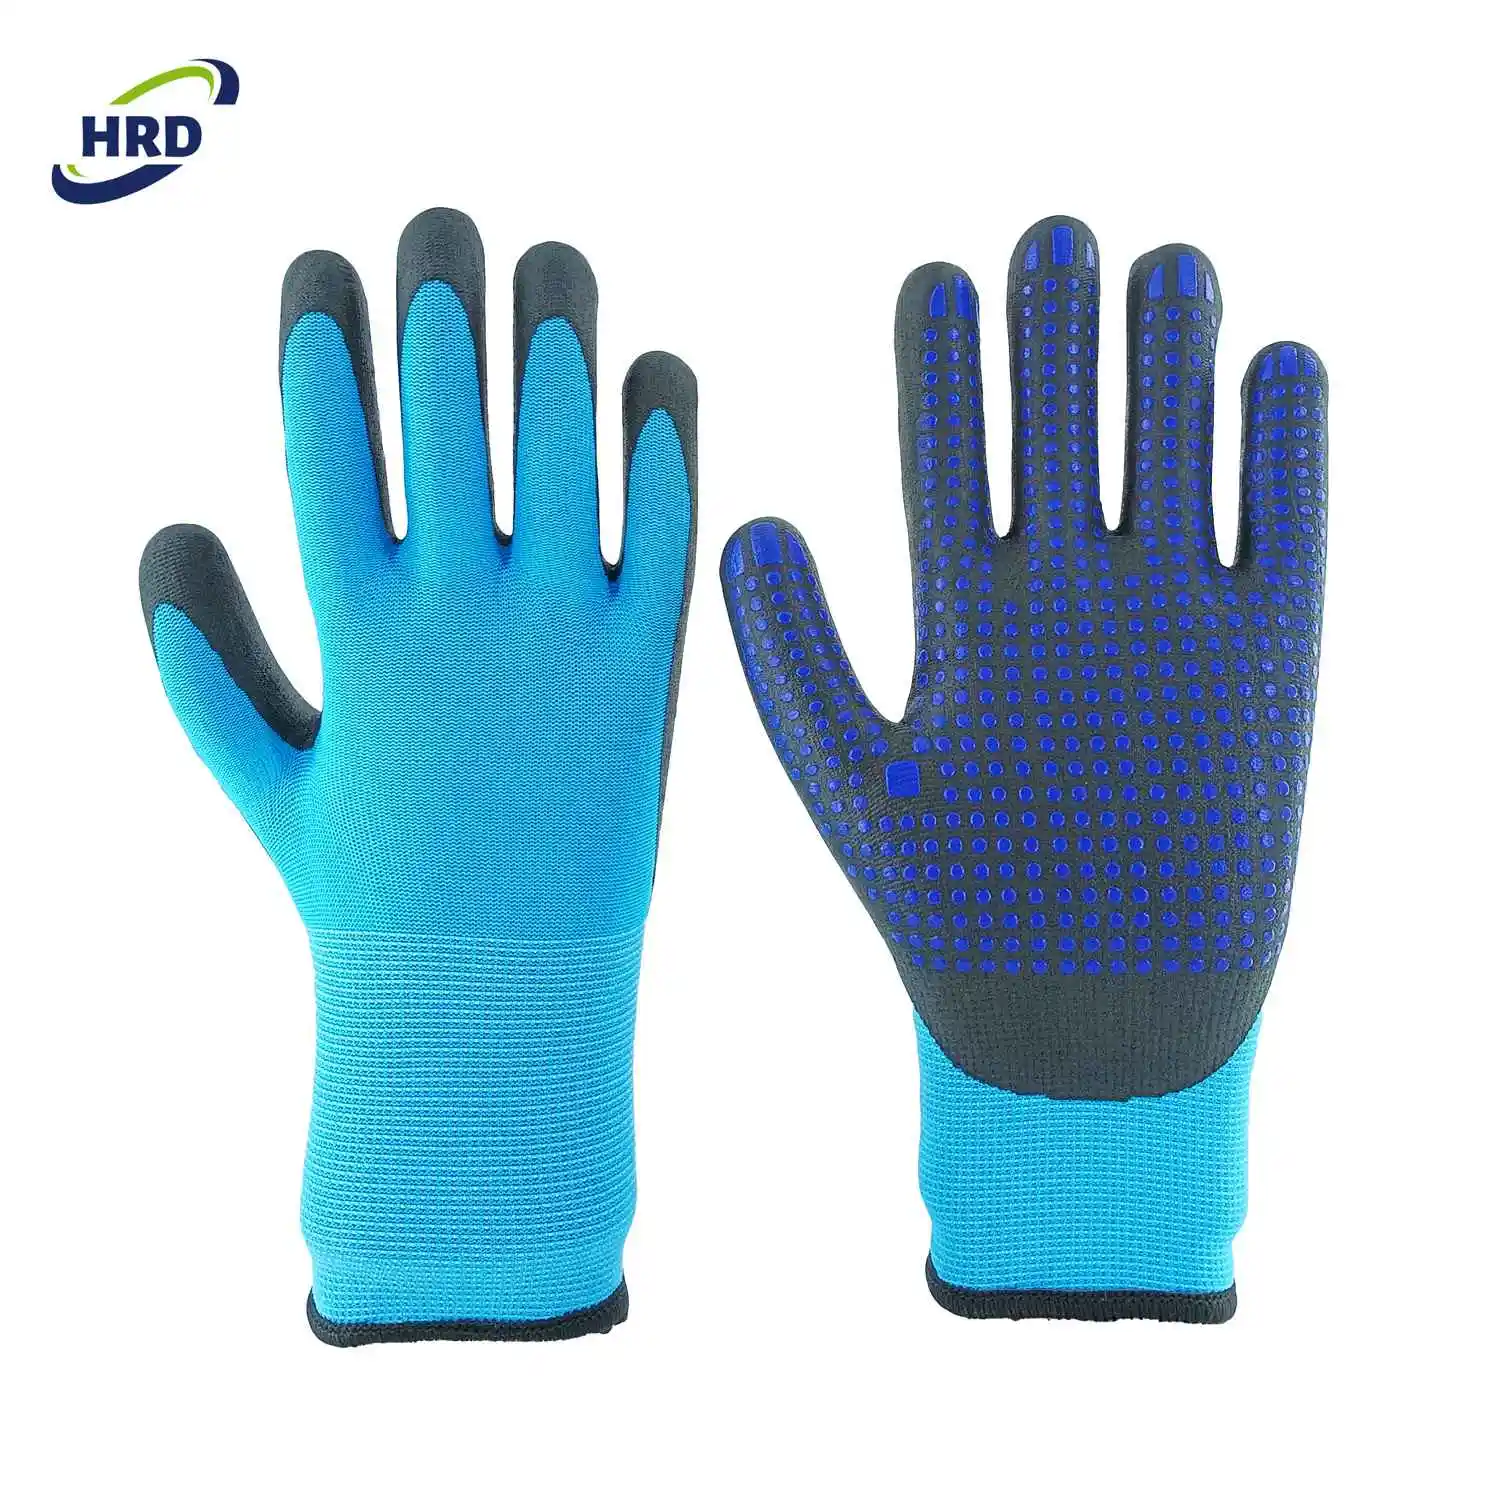 Best Sale Micro Foam Nitrile Coated Nitrile Dots On Palm Superior Grip Safety Winter Work Gloves